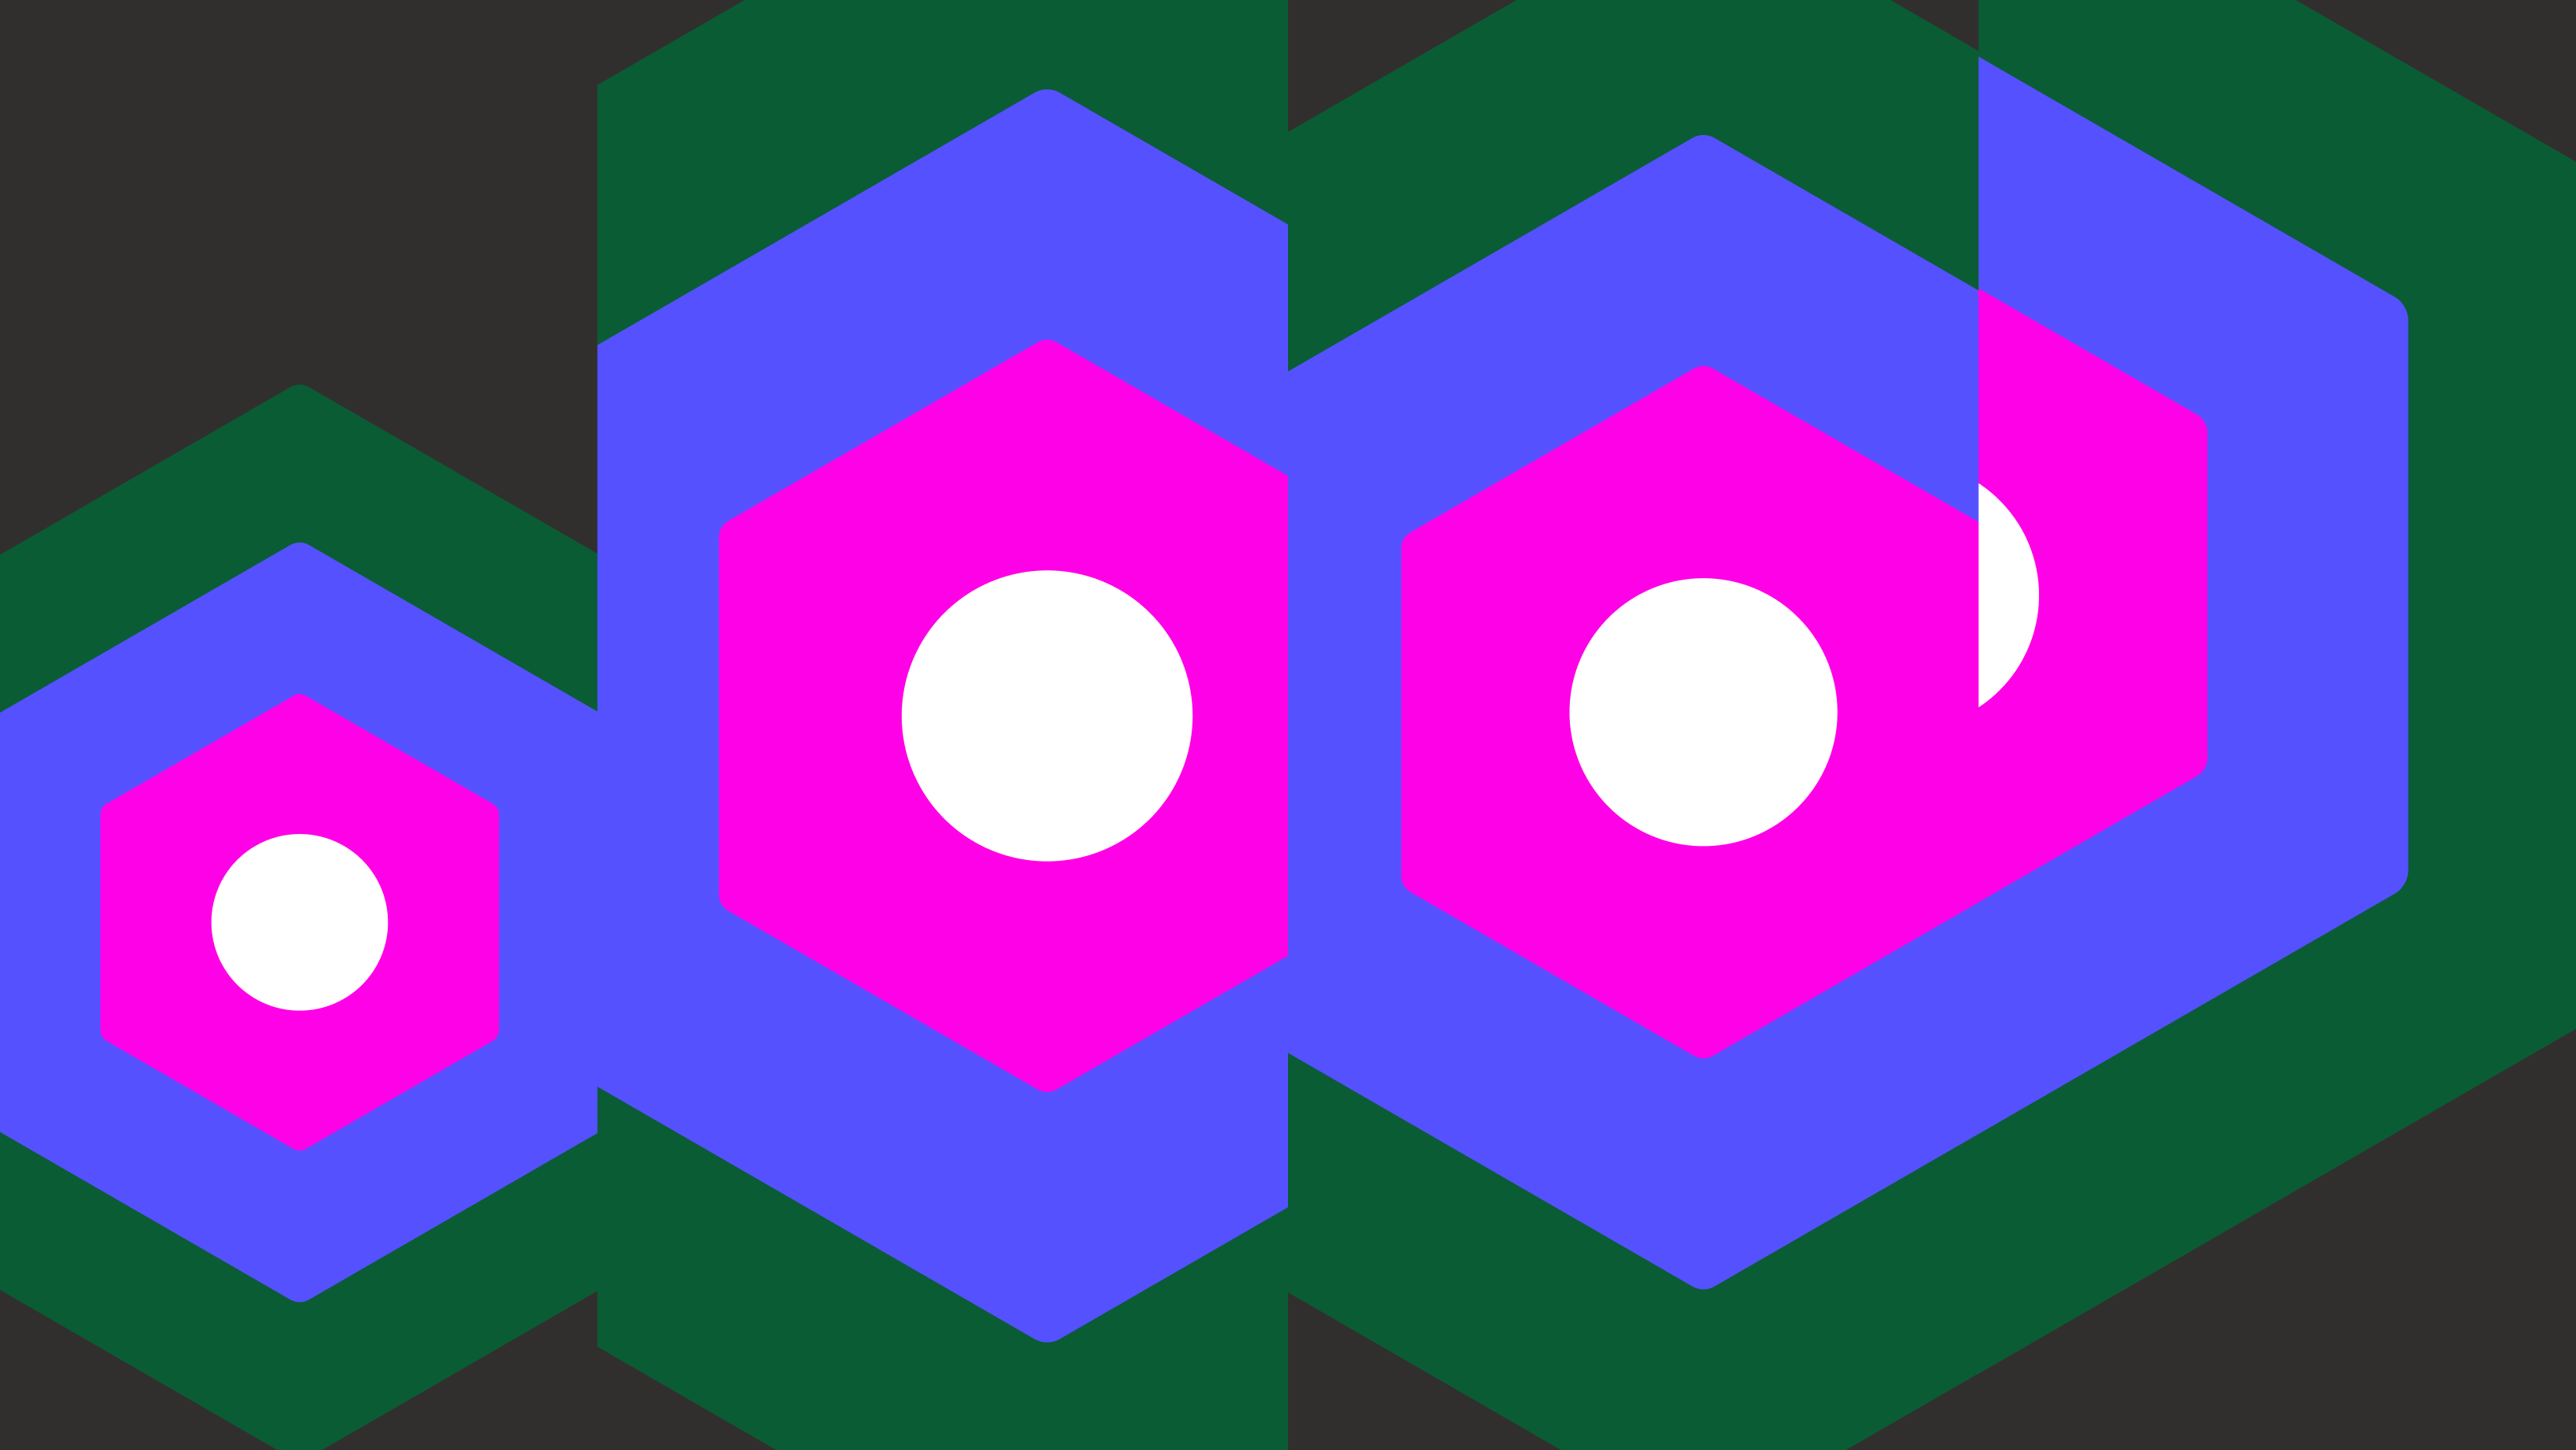 This image features a graphic design with a pattern of overlaid hexagons in varying shades of pink, blue, and green, with white circles in the center of each hexagon. The background consists of darker shades of green, creating a sense of depth. The image has a modern and abstract feel.